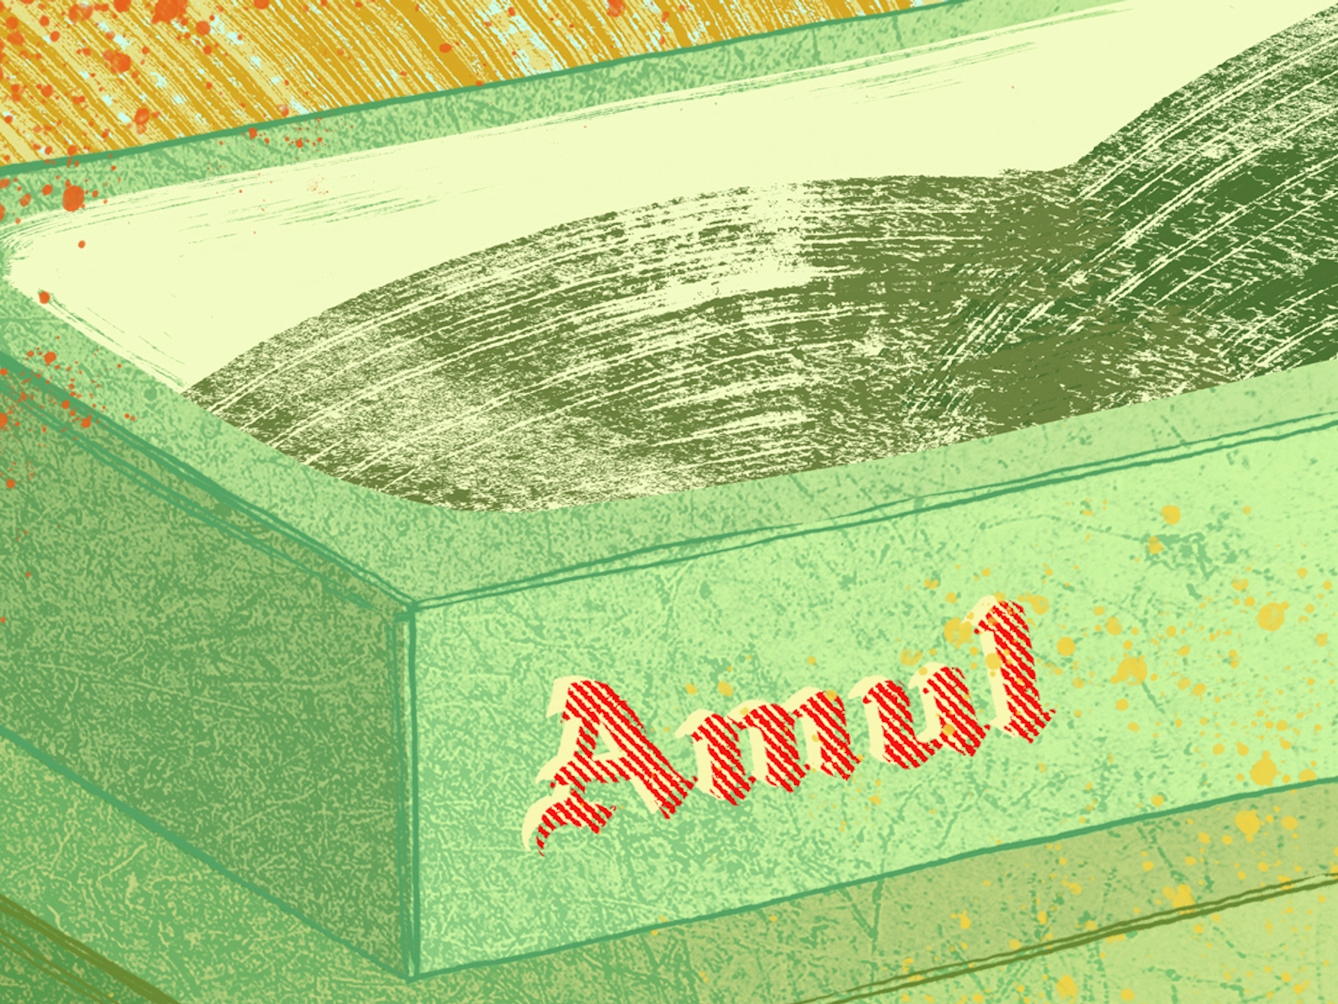 A digital illustration of packs of Amul butter. The packs are bright green with the red text of 'Amul' on the side, in the background are orange and yellow swirls representing butter. 